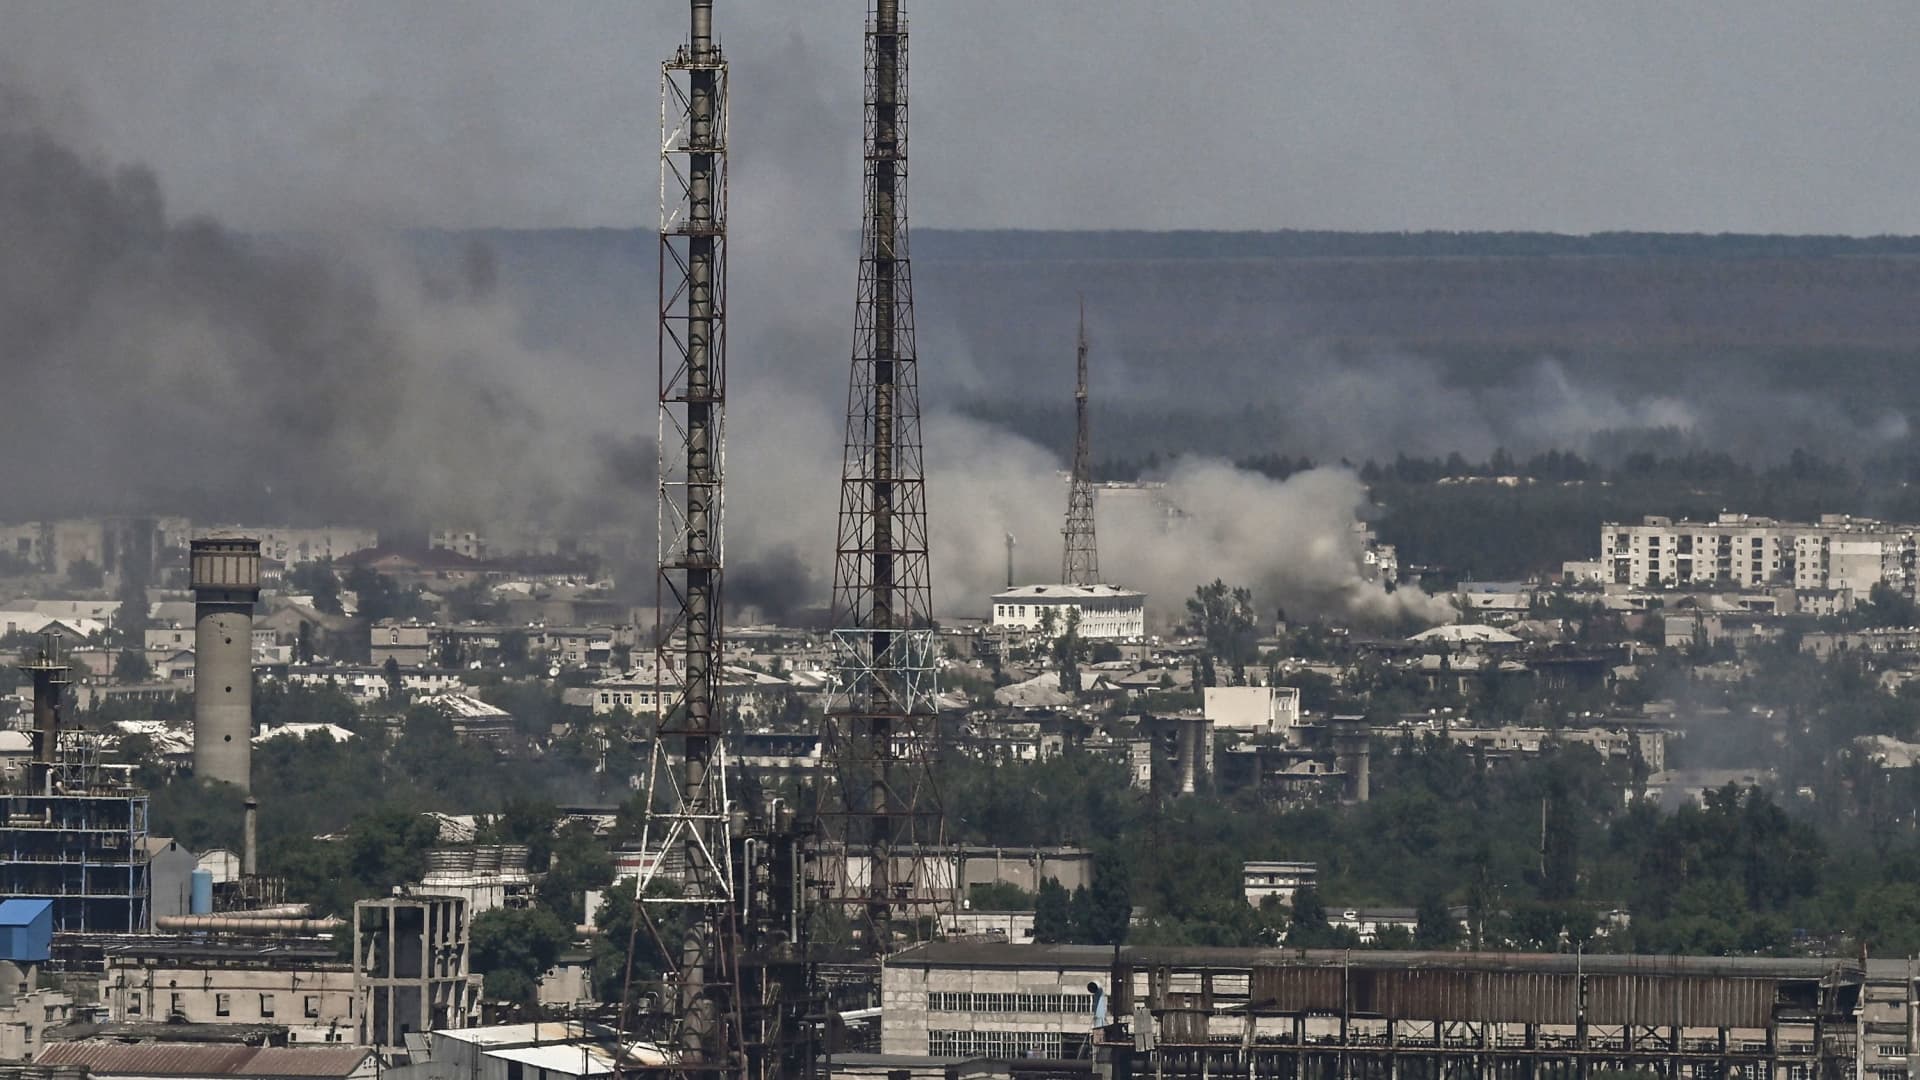 Black smoke and dirt rise from the city of Severodonetsk during battle between Russian and Ukrainian troops in the eastern Ukraine region of Donbas on June 9, 2022.